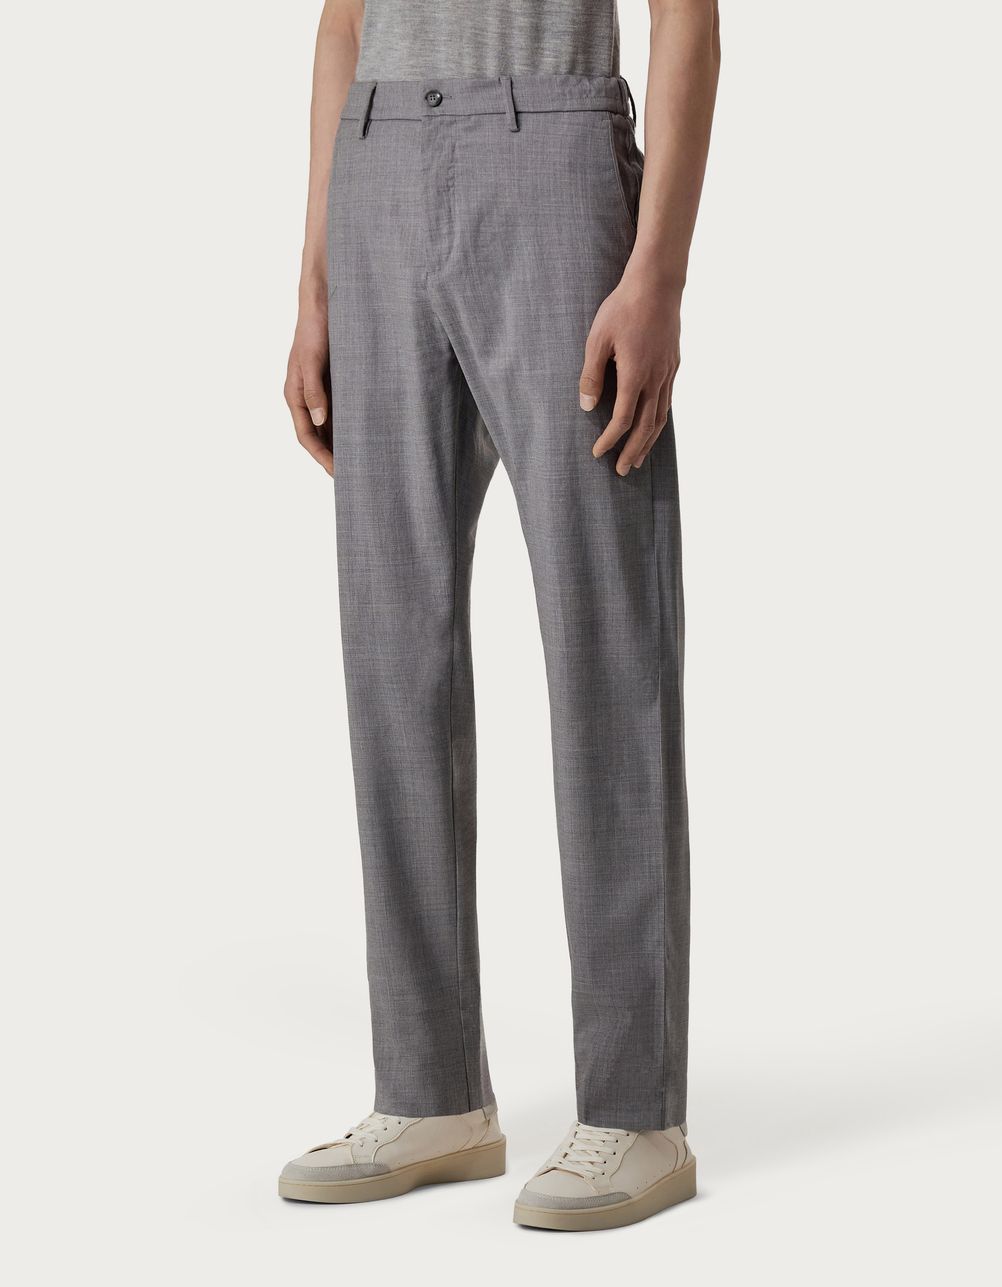 Chinos with drawstring in grey mélange Impeccabile wool canvas